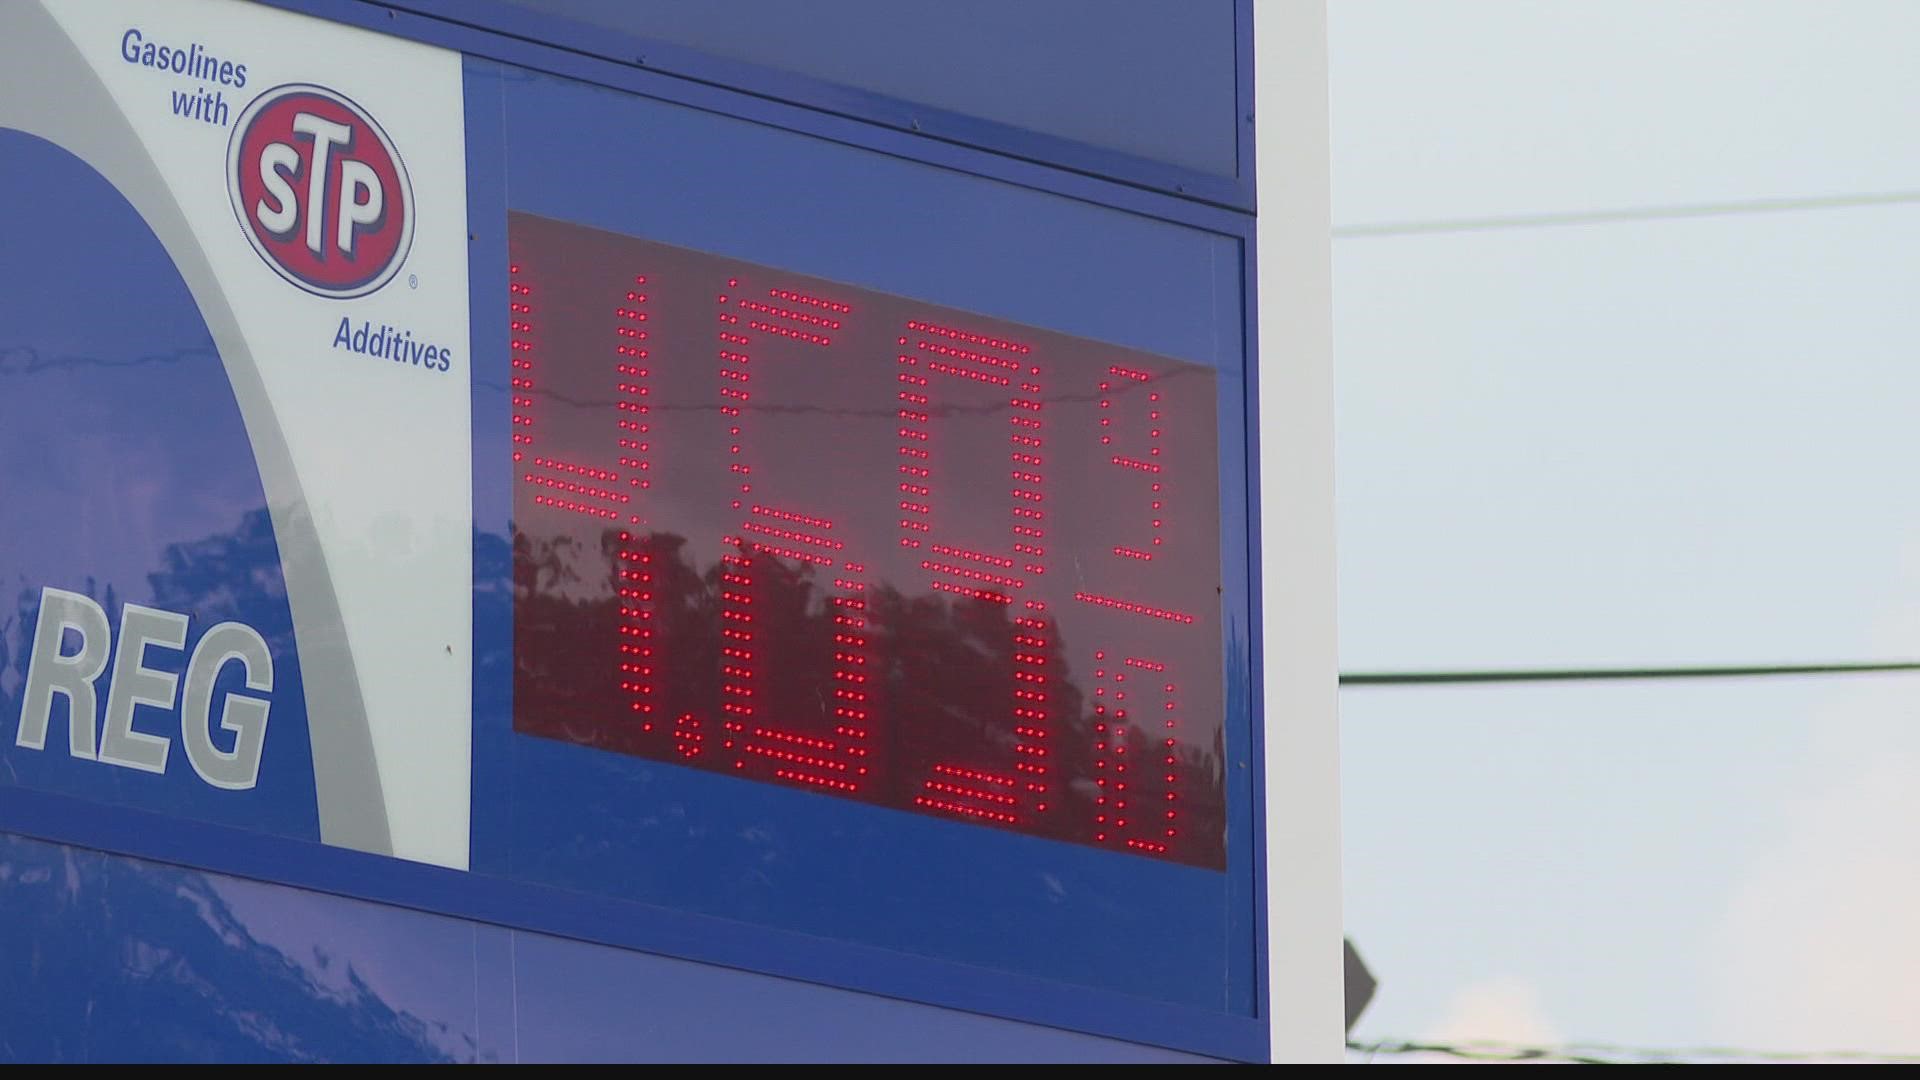 Some motorists told 13News they're thinking about ways to earn more money to pay for higher fuel prices.